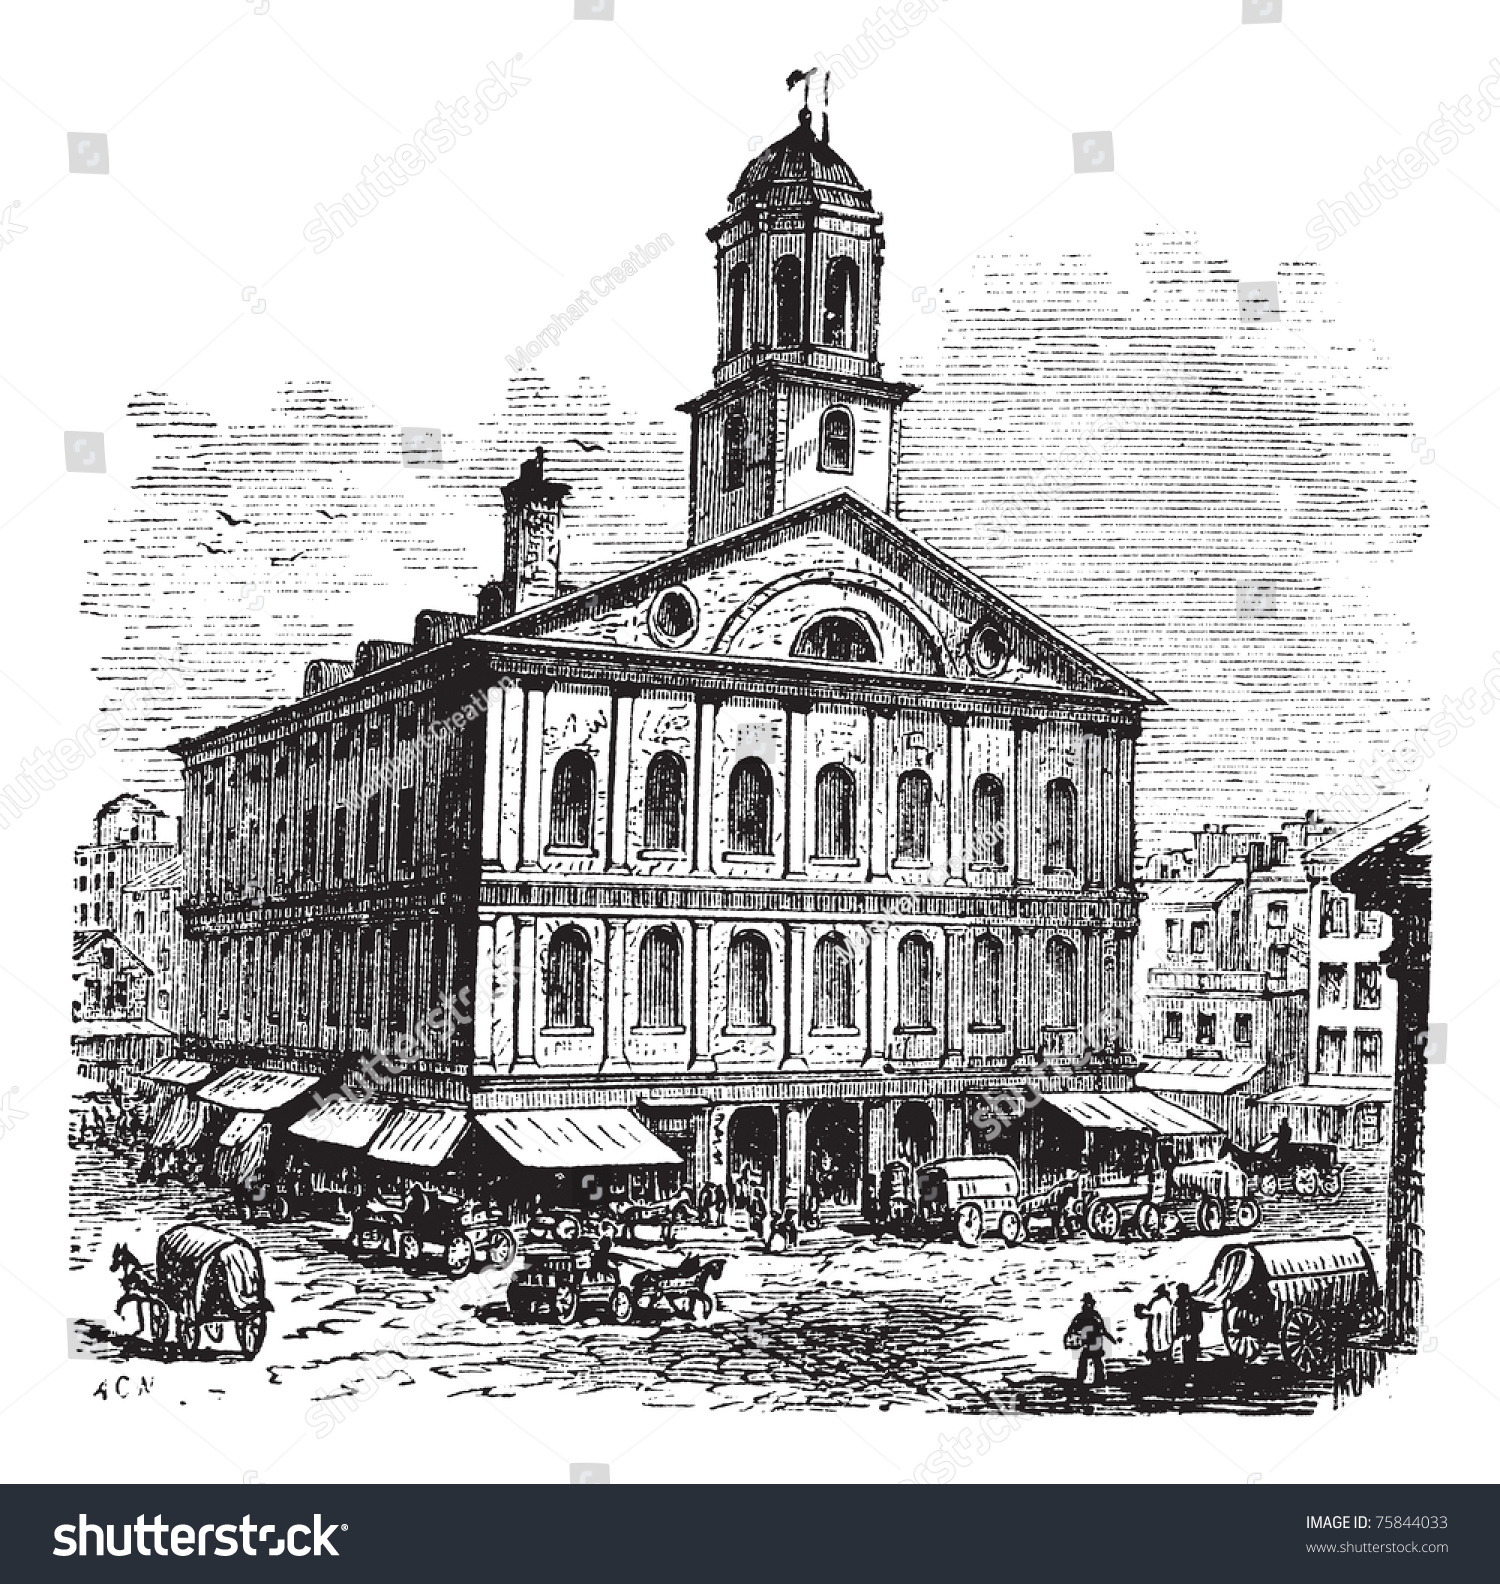 SVG of Faneuil Hall or The Cradle of Liberty, Boston, Massachusetts, USA vintage engraving.  Old engraved illustration of building exterior svg